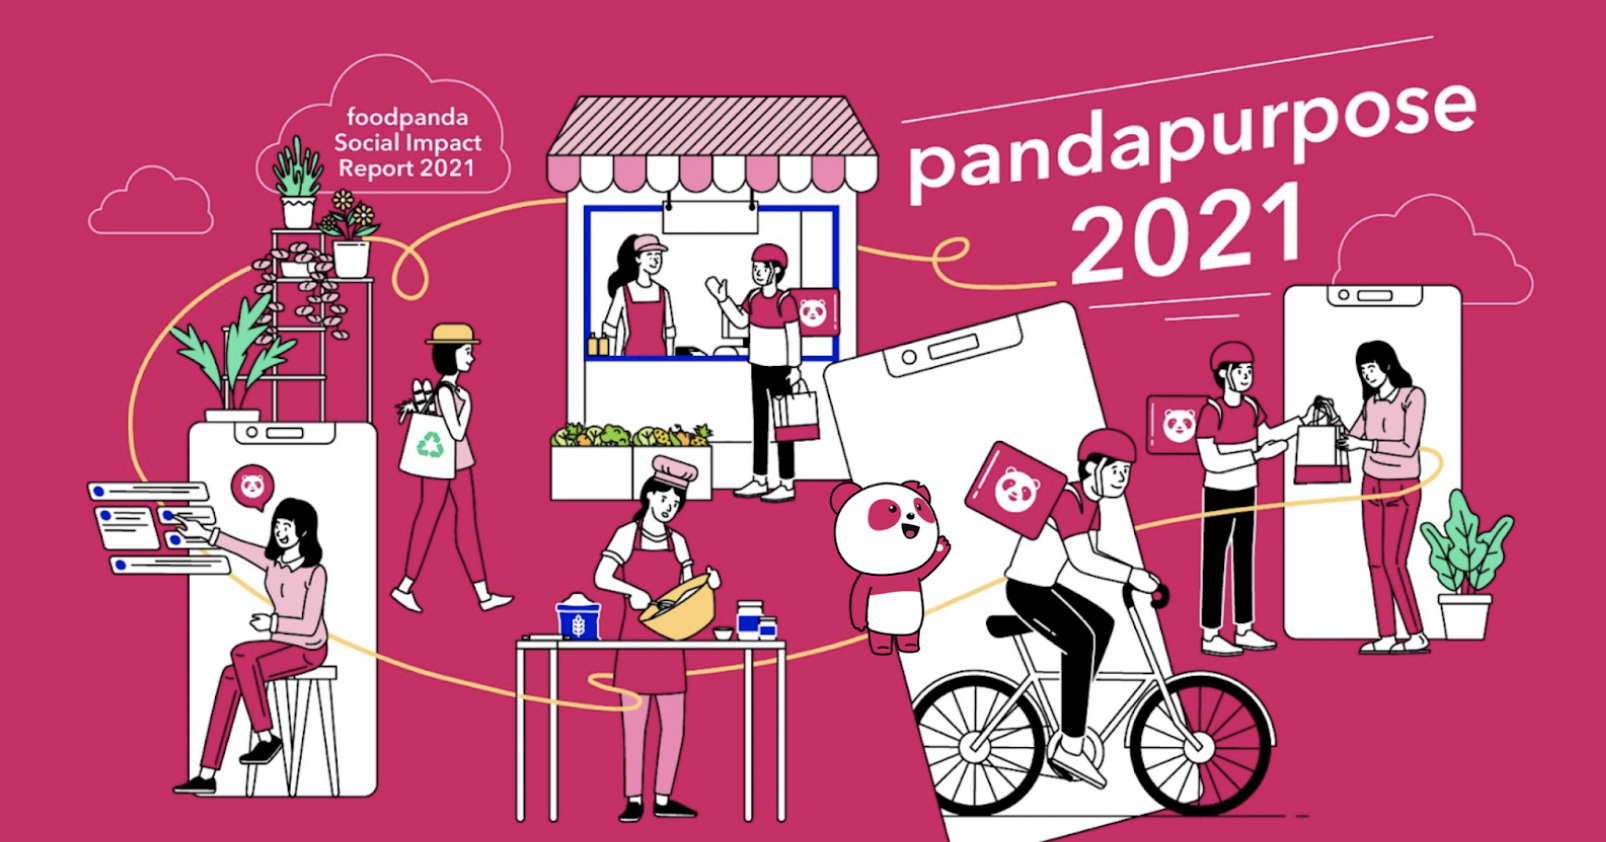 foodpanda publishes inaugural Social Impact Report; dedicated over US$35 million to grow communities, digitalise MSMEs and support riders in Asia